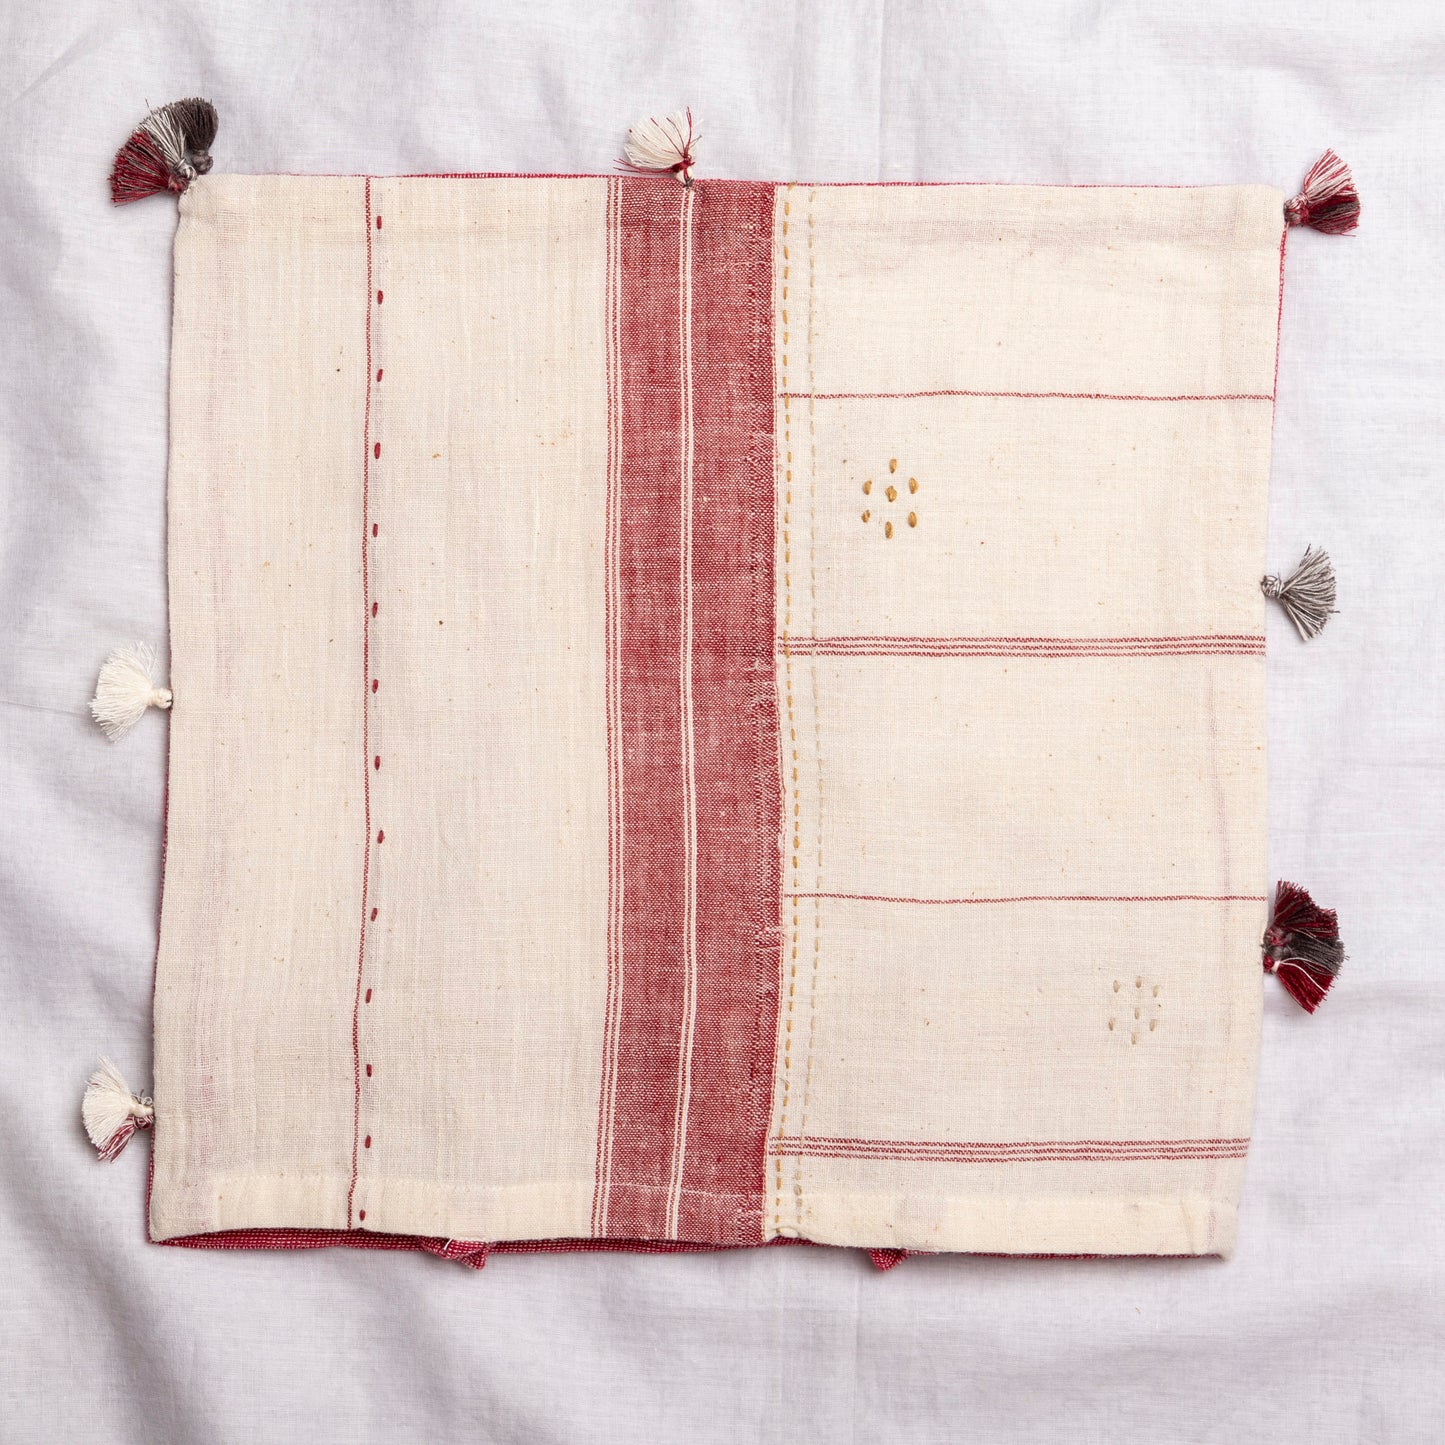 Set of 2 red and white cotton pillowcases 30x30CM